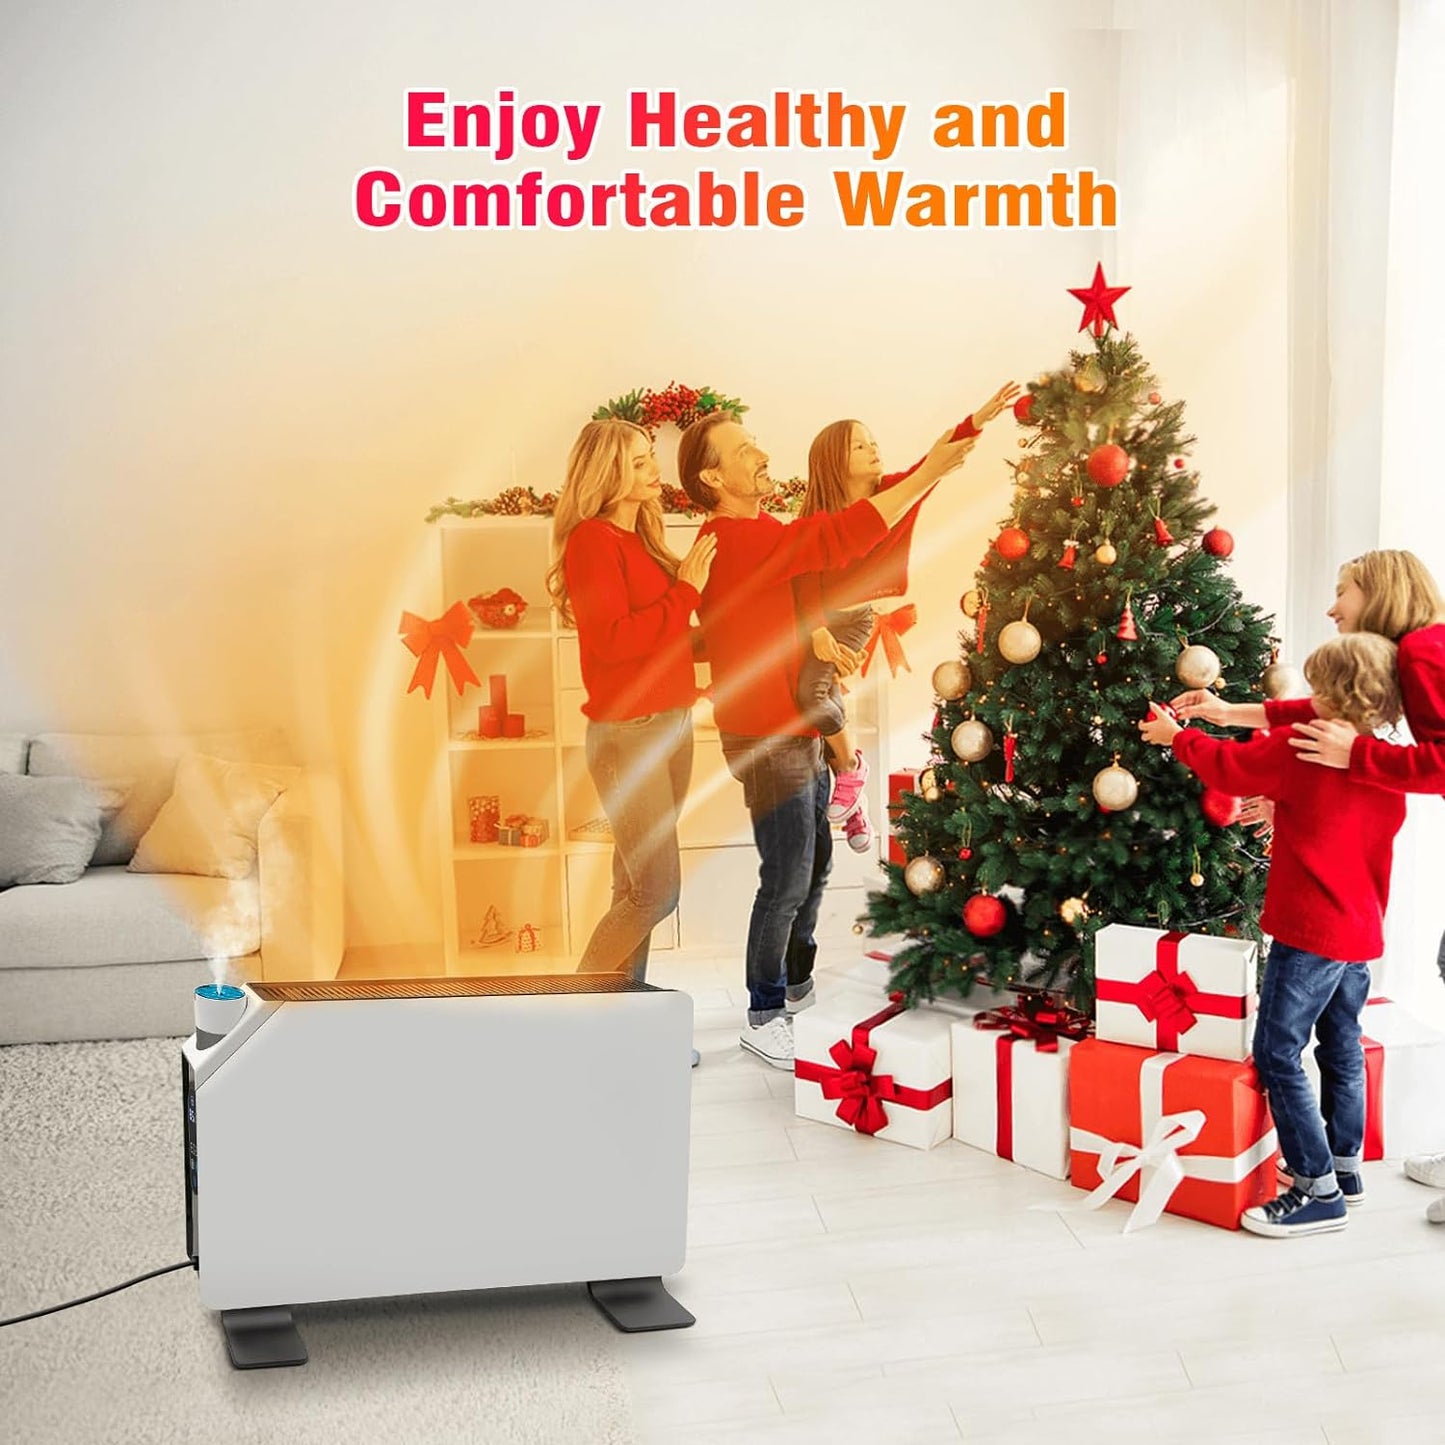 CTSC Convection Heater - Panel Heater - Space Heater Indoor Large Room - 750W/1500W Convection Panel Heater with Remote Control, Adjustable Thermostat, Freestanding/Wall Mount